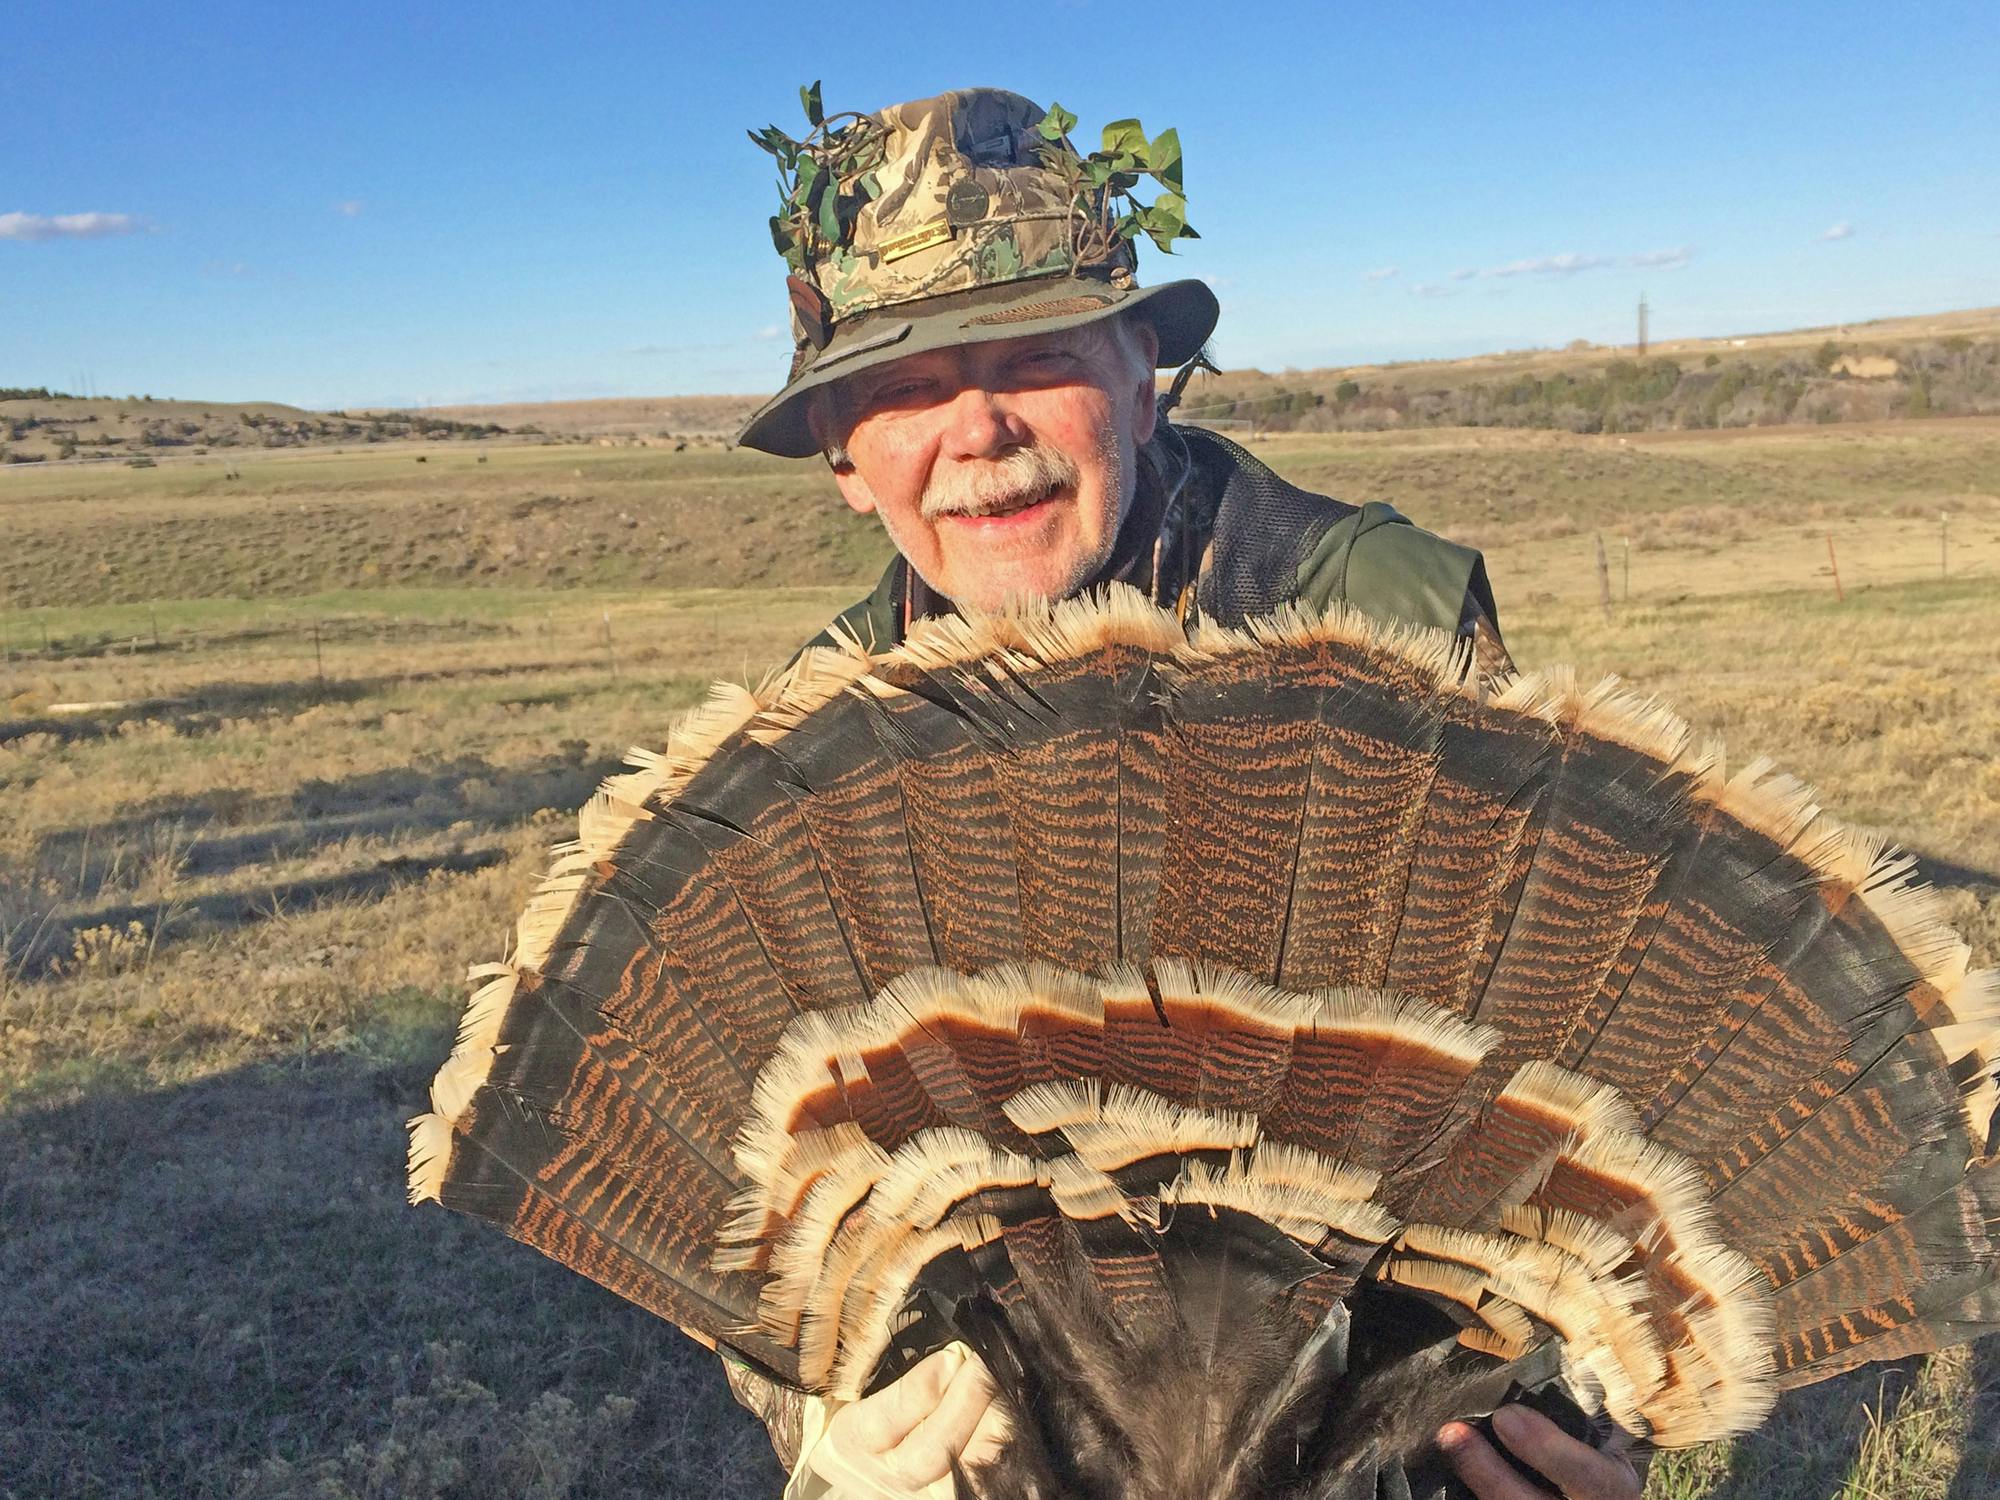 80-year-old hunter Dick Alford pushes through rehab and back into the hunt